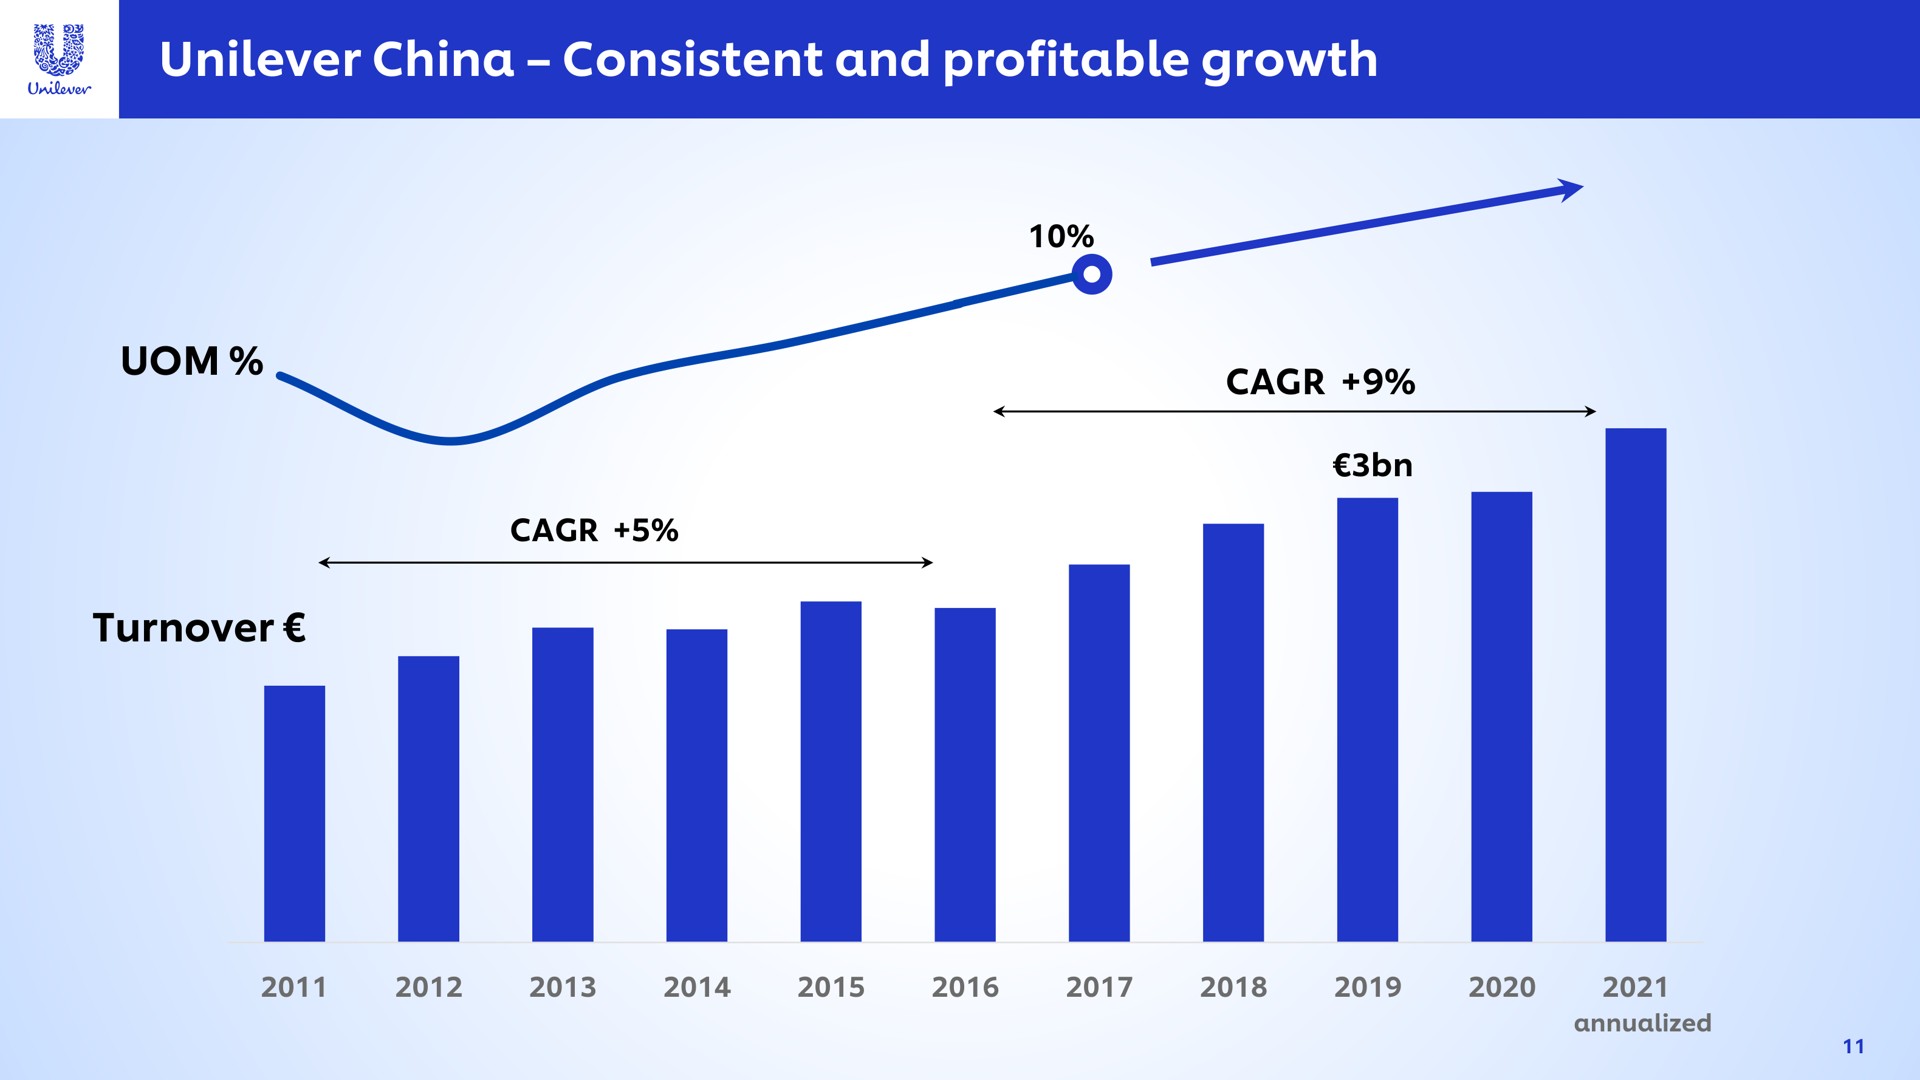 china consistent and profitable growth | Unilever